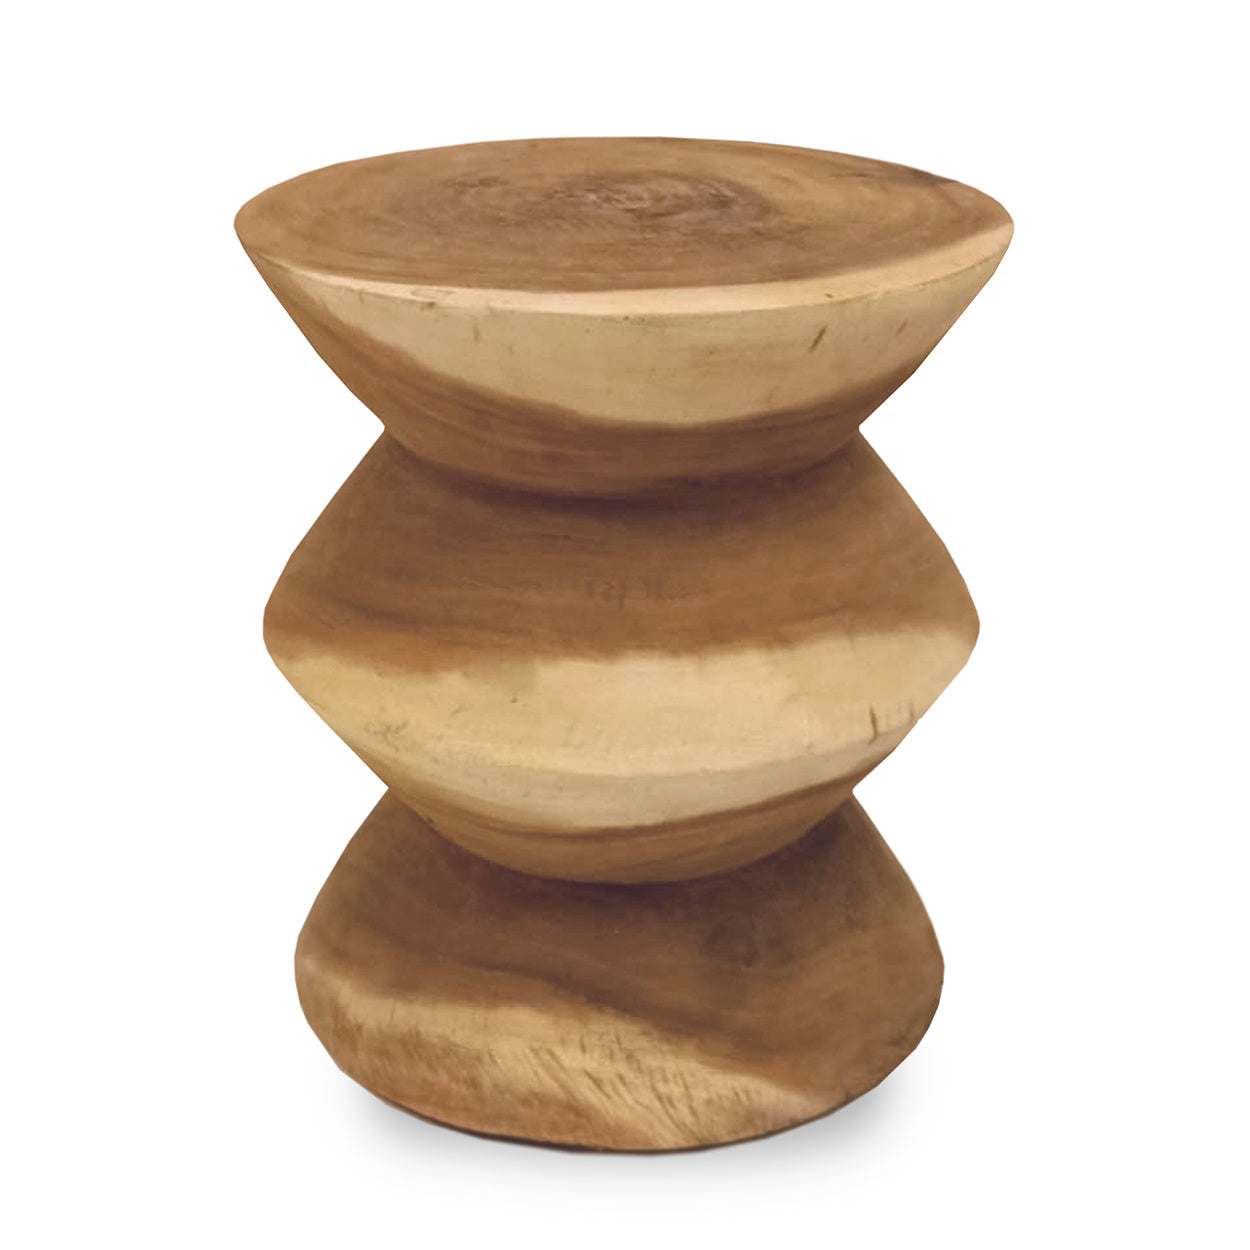 THE INDRA Stool - Natural